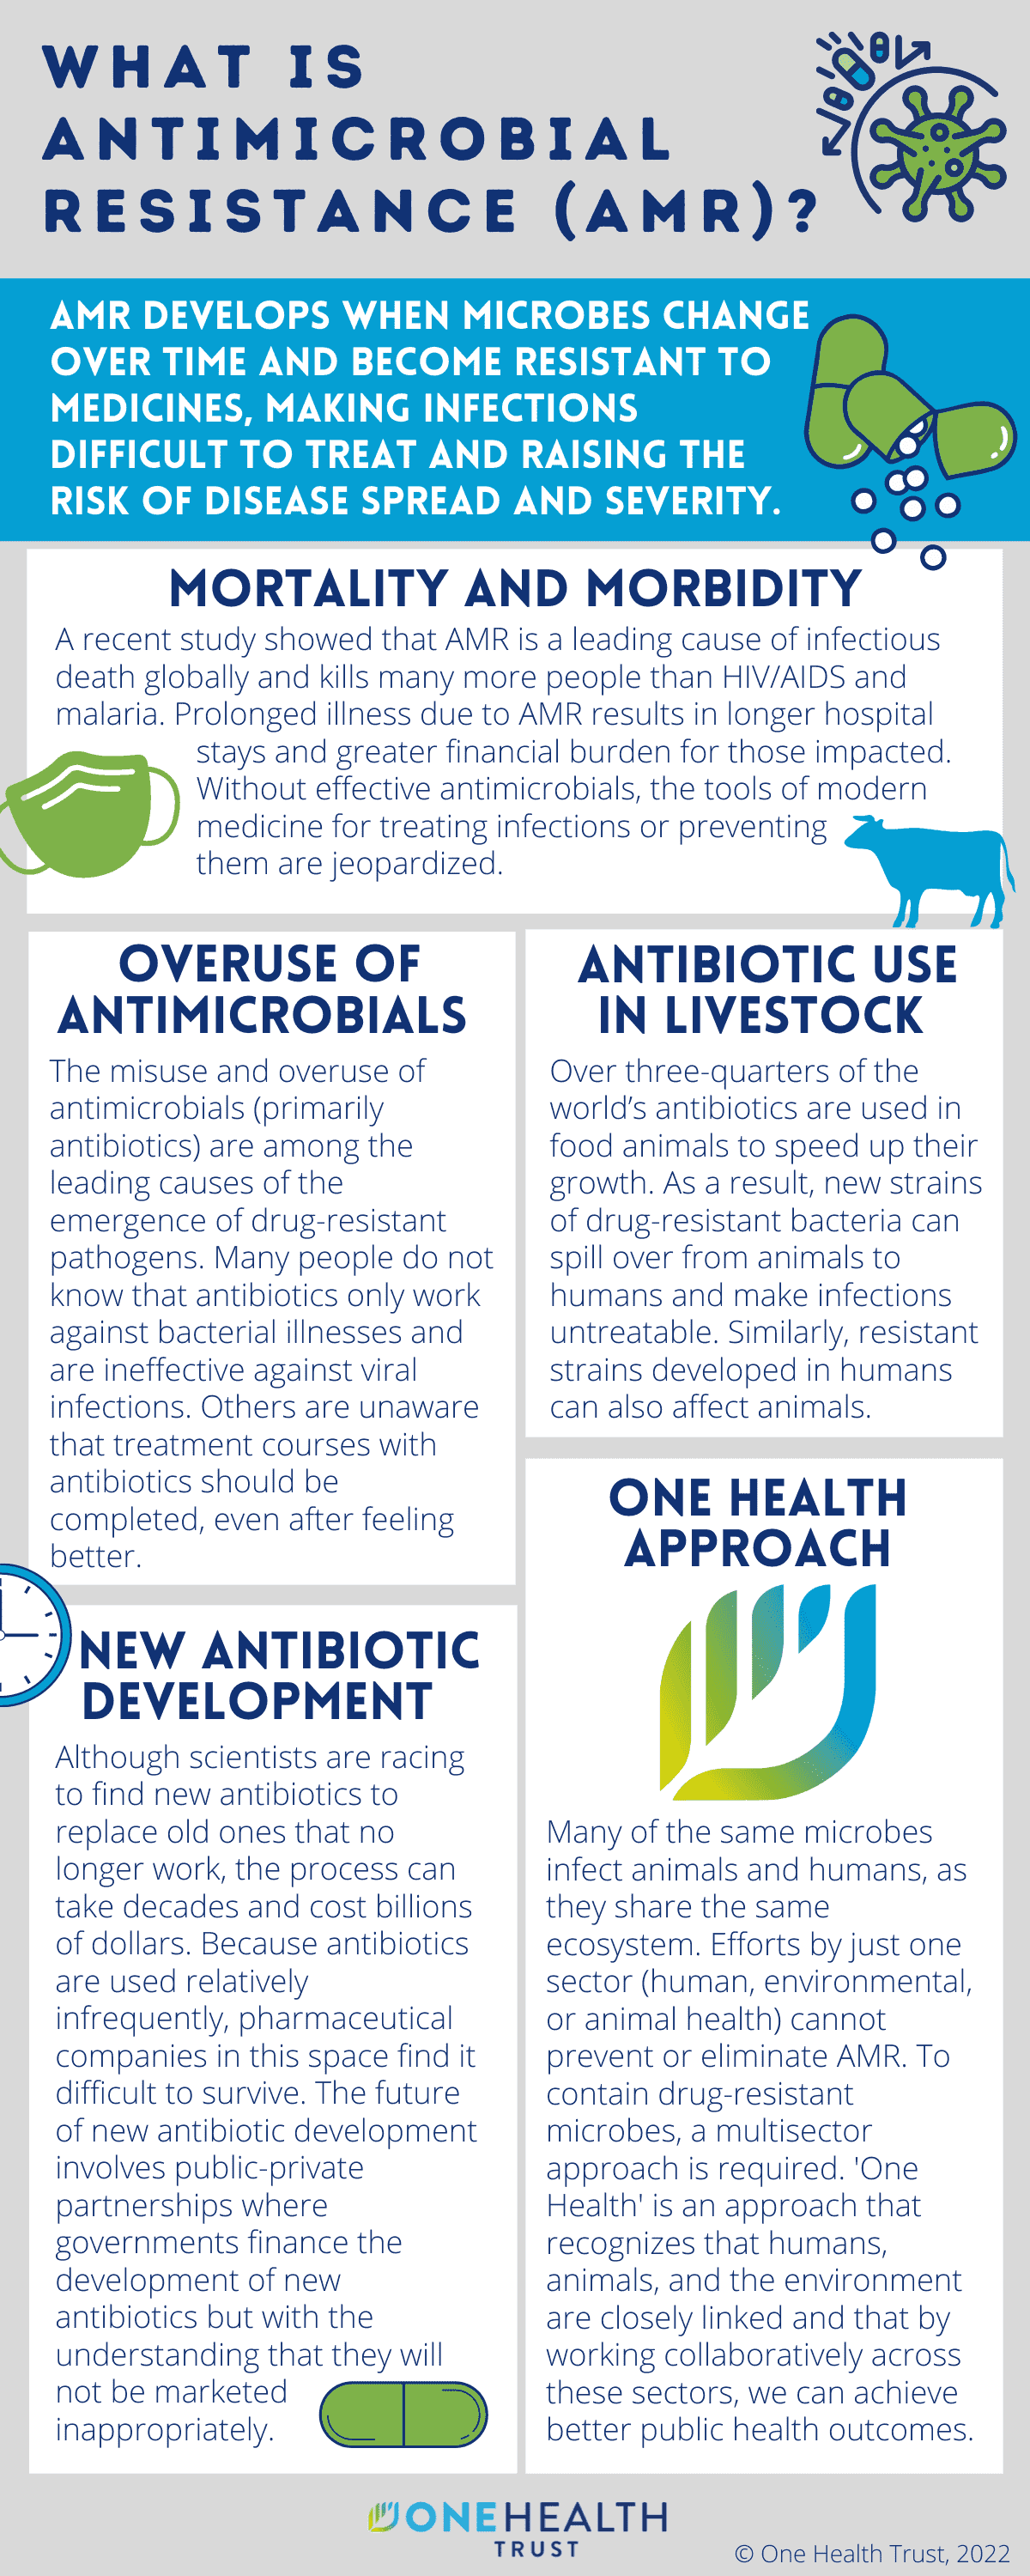 Antimicrobial resistance (AMR) a global concern